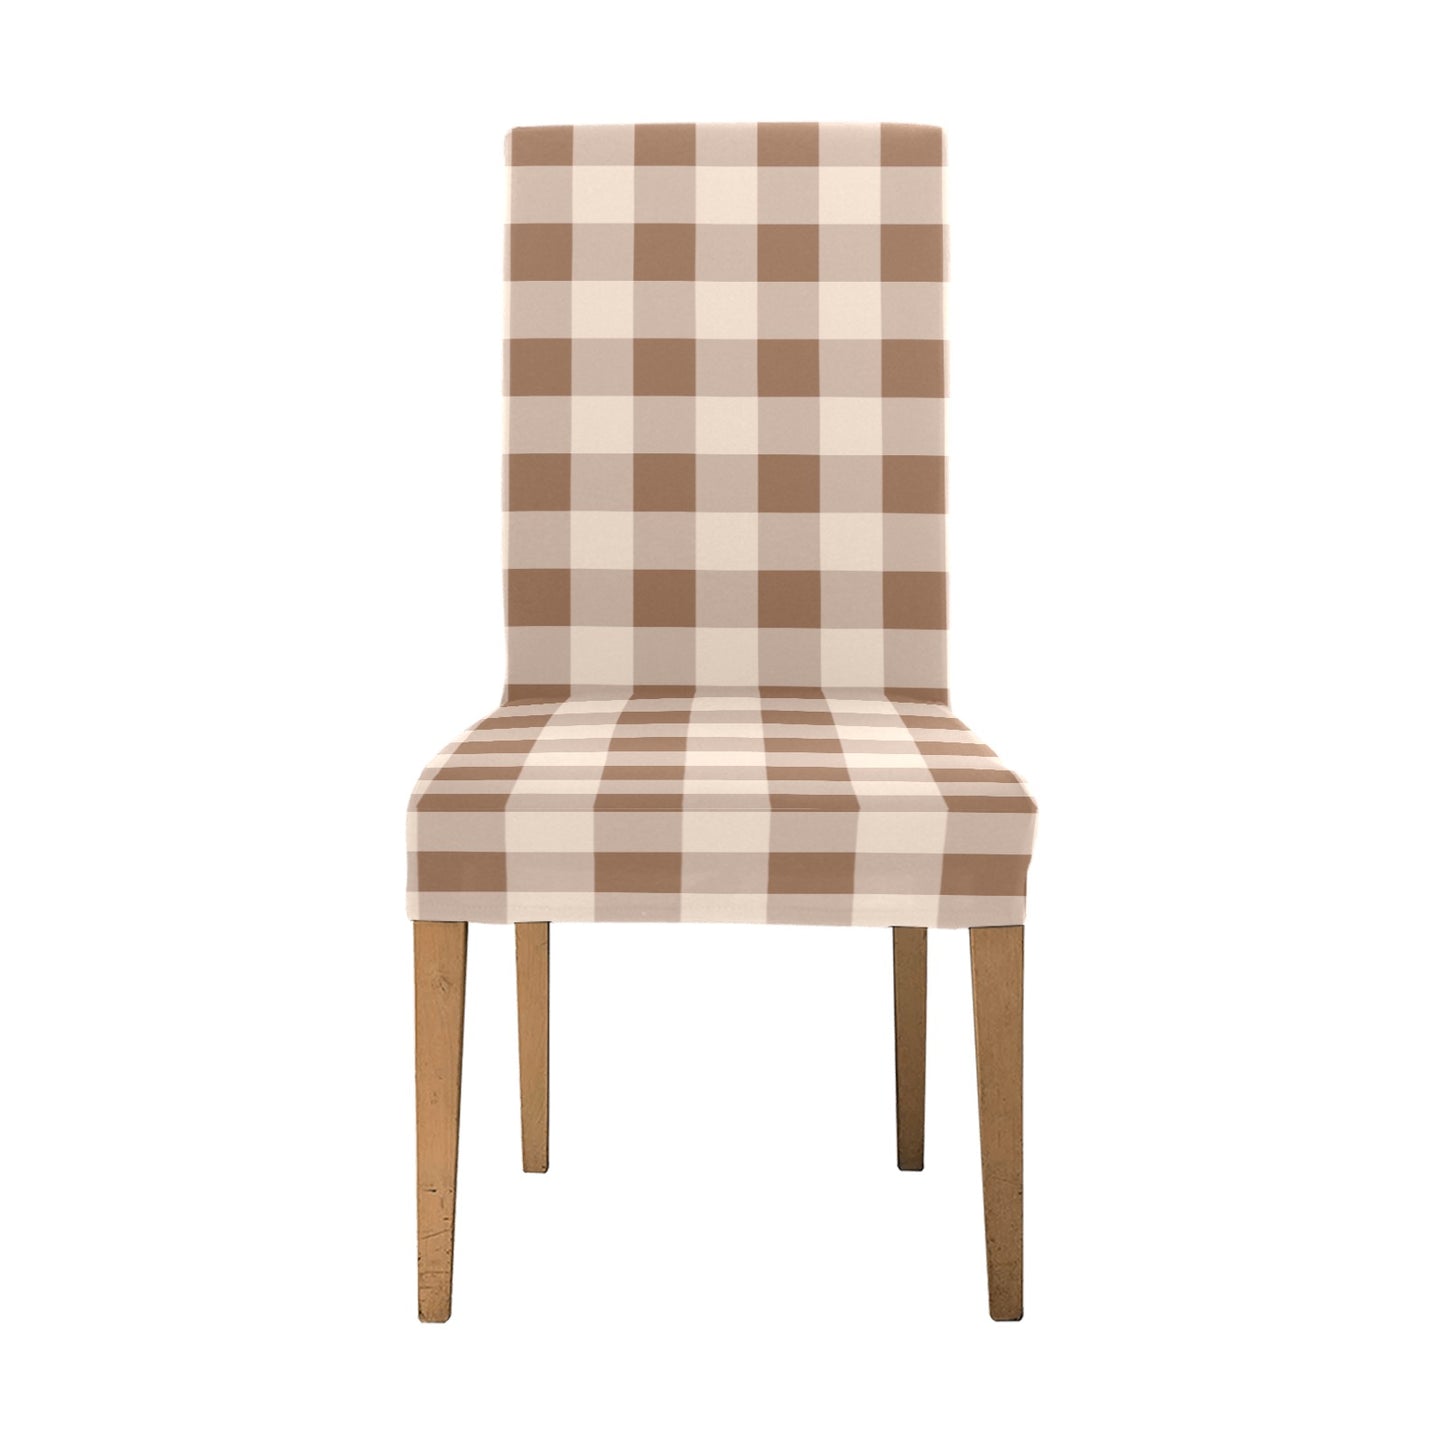 Buffalo Check Dining Chair Seat Covers, Beige Cream Brown Plaid Stretch Slipcover Furniture Dining Room Home Decor Starcove Fashion